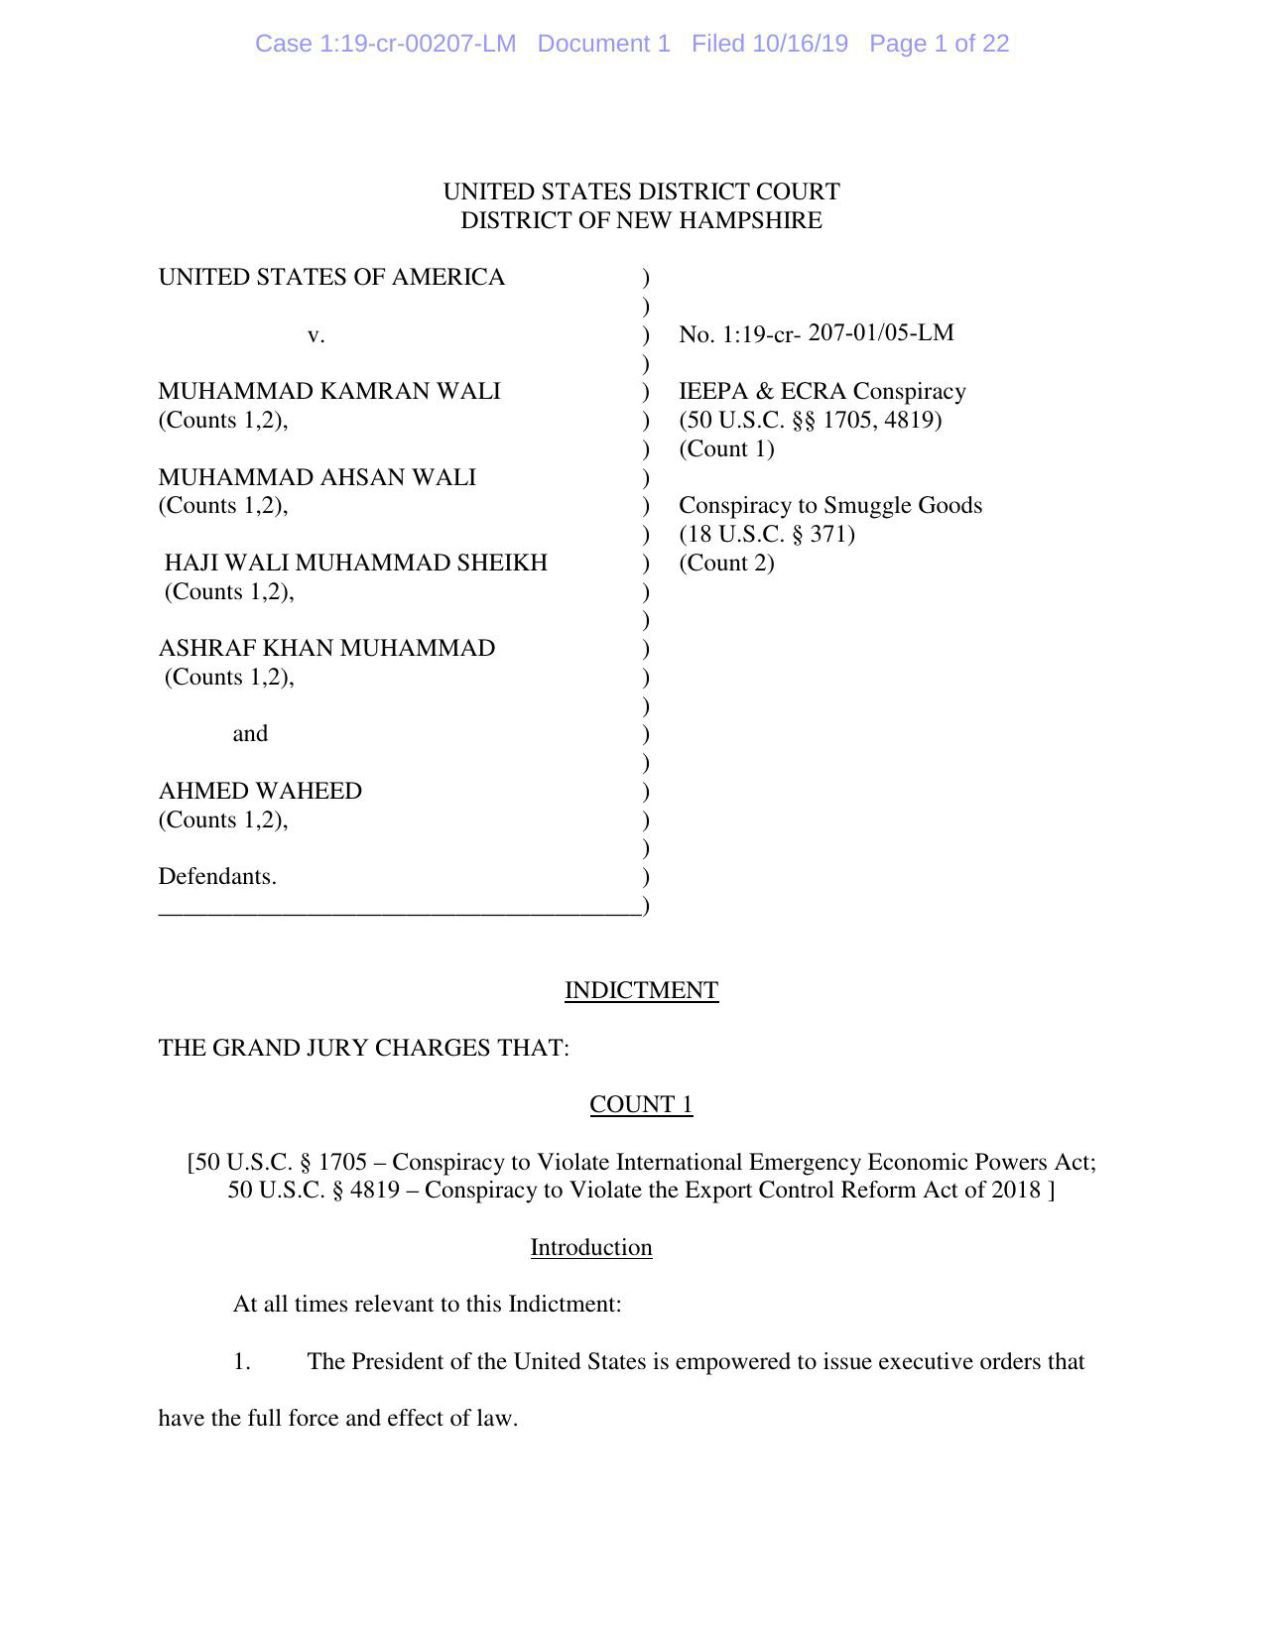 Federal indictment